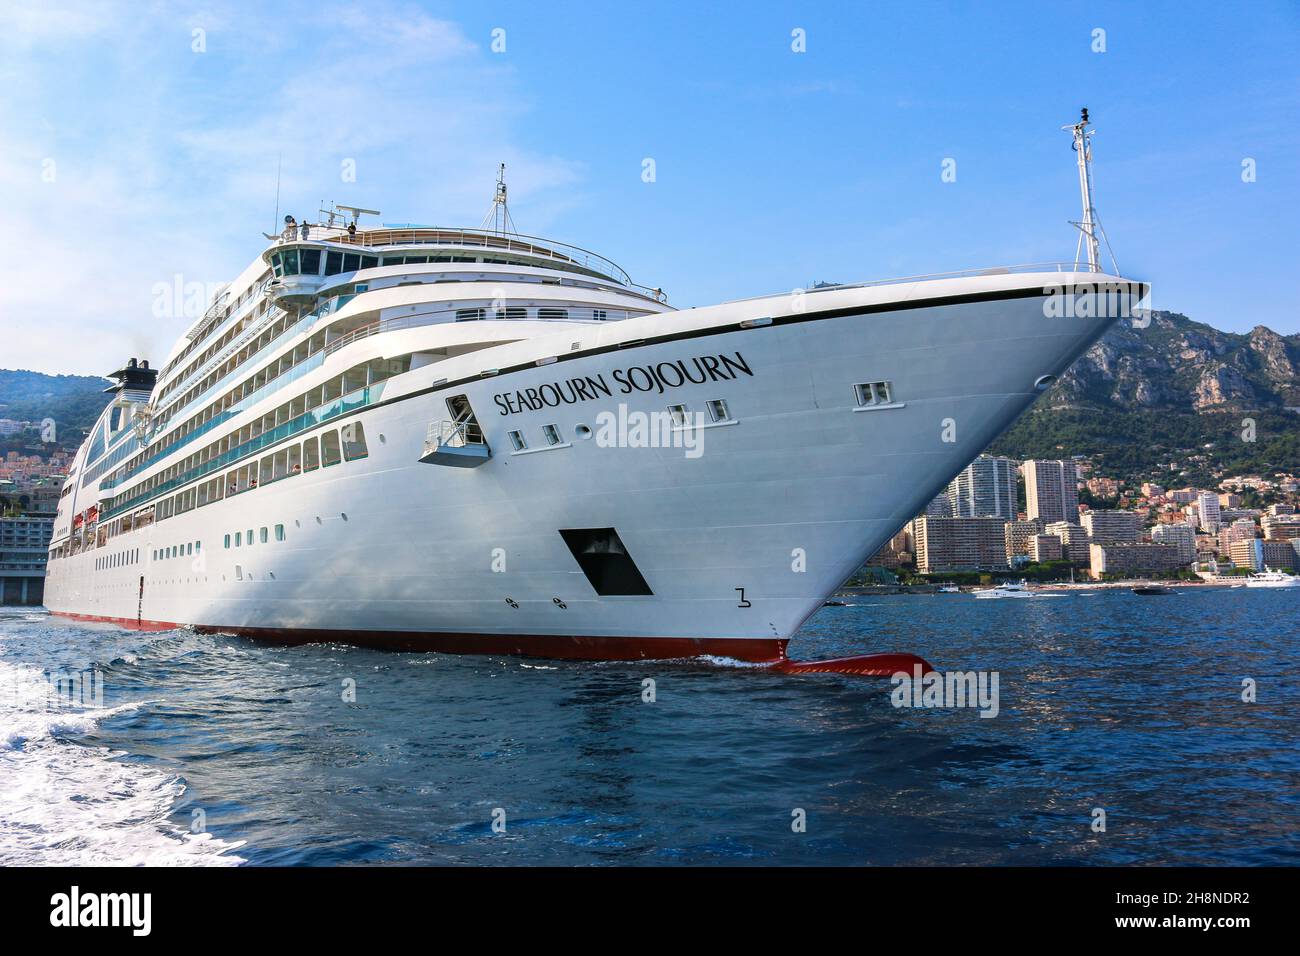 Seabourn Sojourn, luxury cruise ship operated by Seabourn Cruise Line. The vessel left port Hercule, Monaco Monte Carlo, Cruises picture image photo Stock Photo